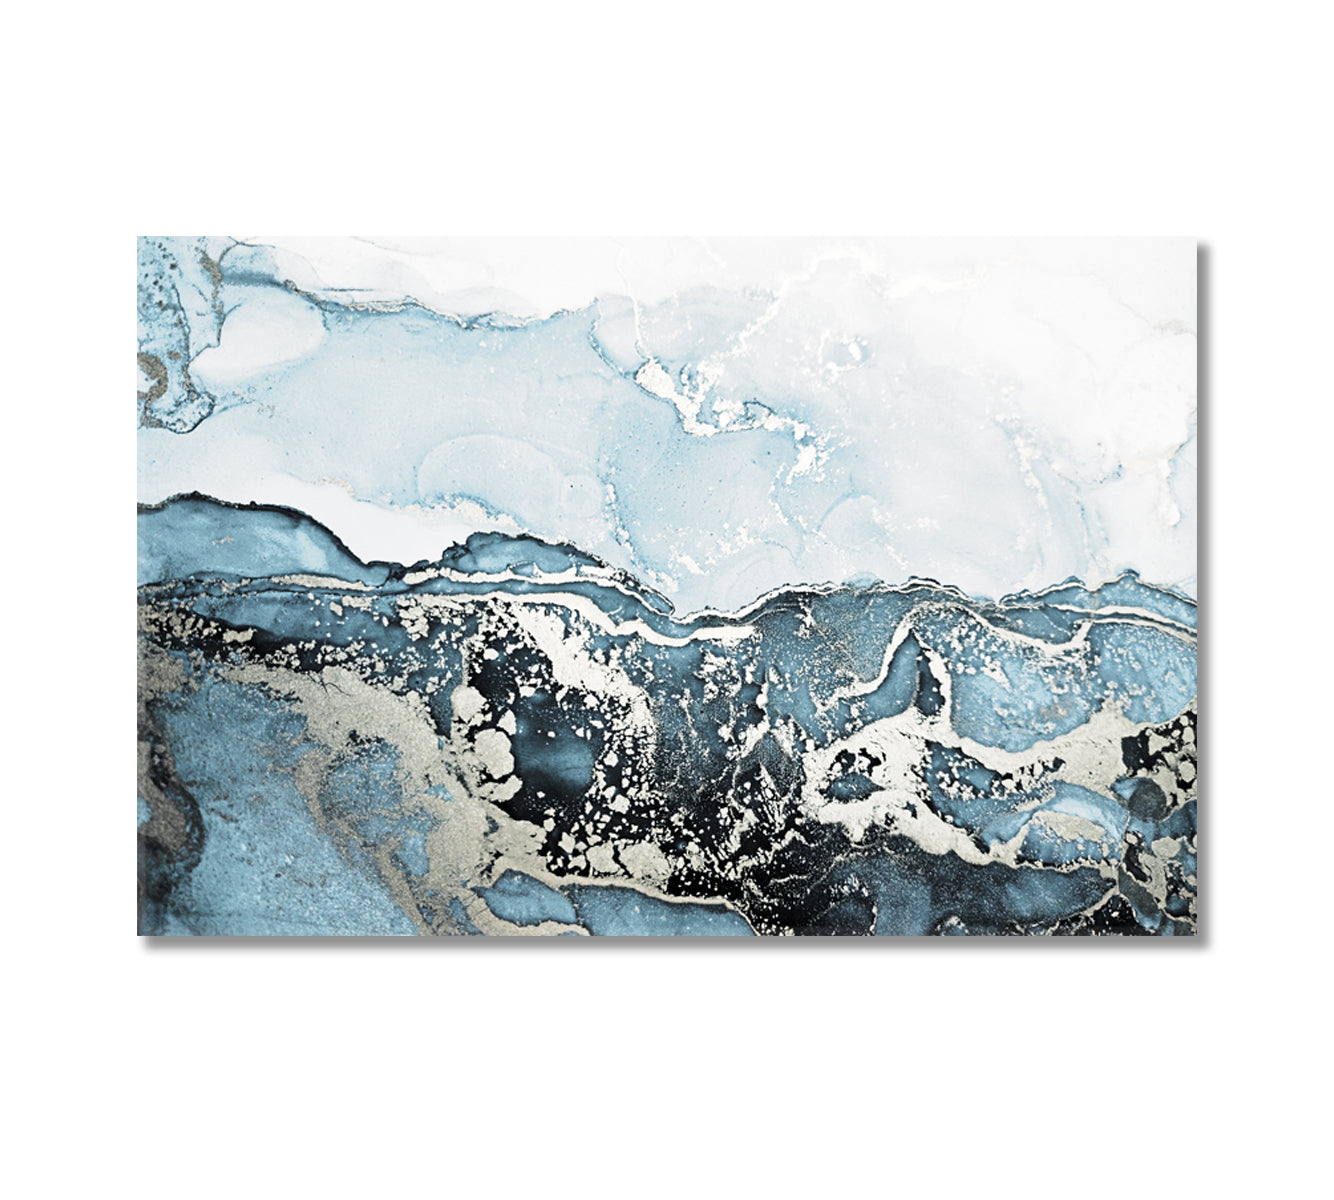 Blurred Gray Abstract Splashes of Liquid Ink Canvas Print-Canvas Print-CetArt-1 Panel-24x16 inches-CetArt